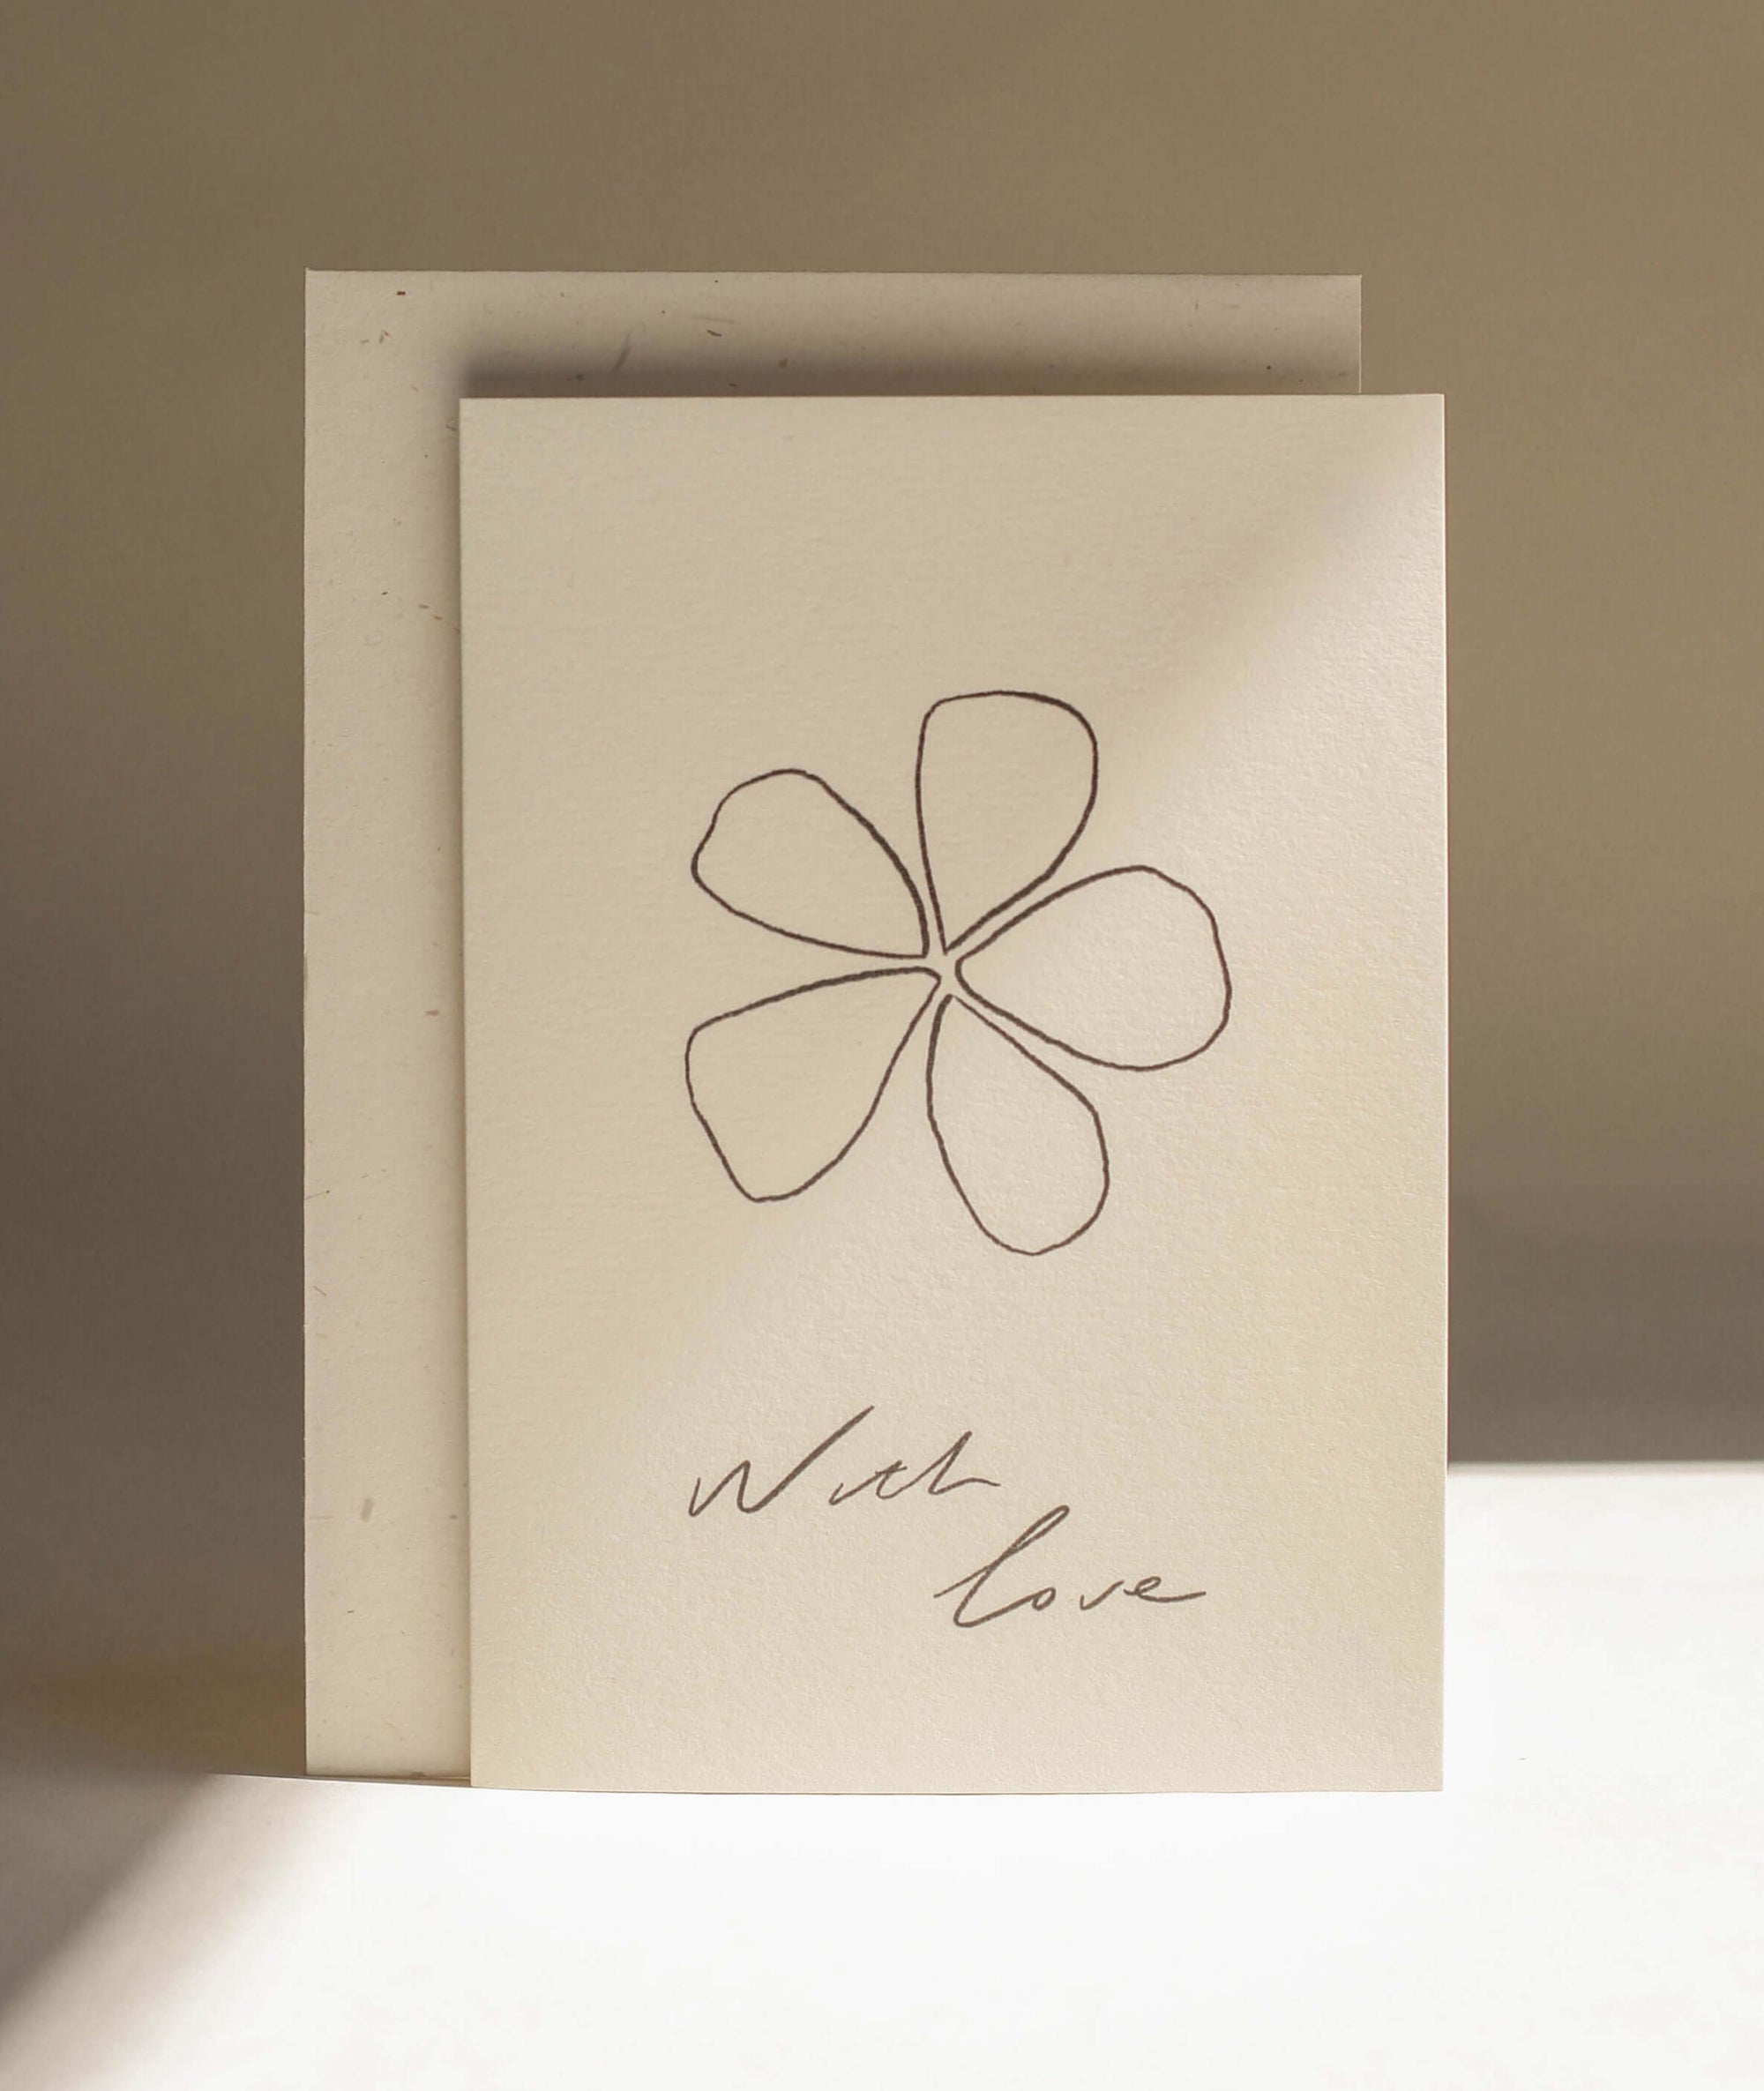 Greeting Card - The Hand Drawn Lettering Says "With Love" And A Hand Drawn Flower. 